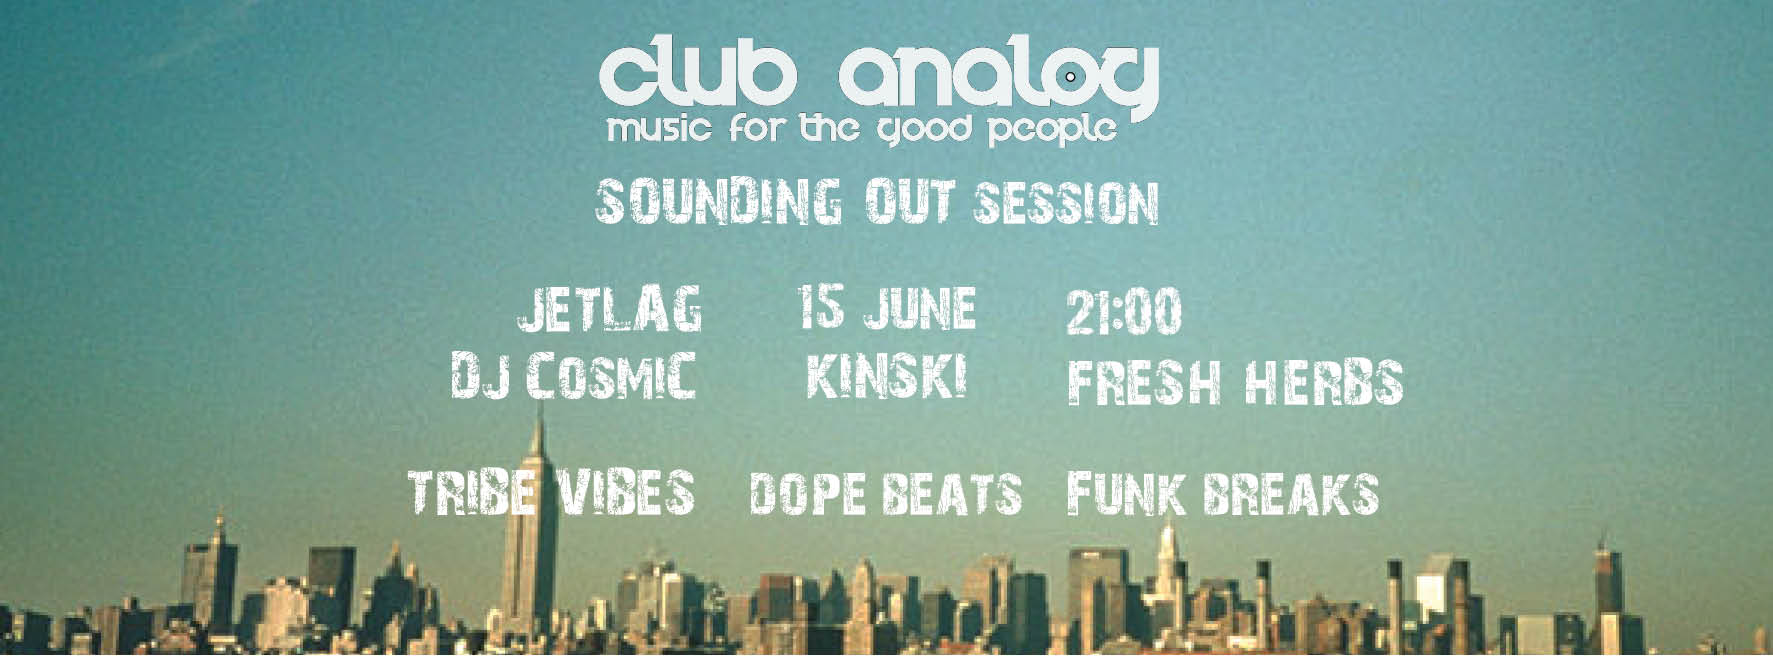 CLUB ANALOG Sounding Out Session